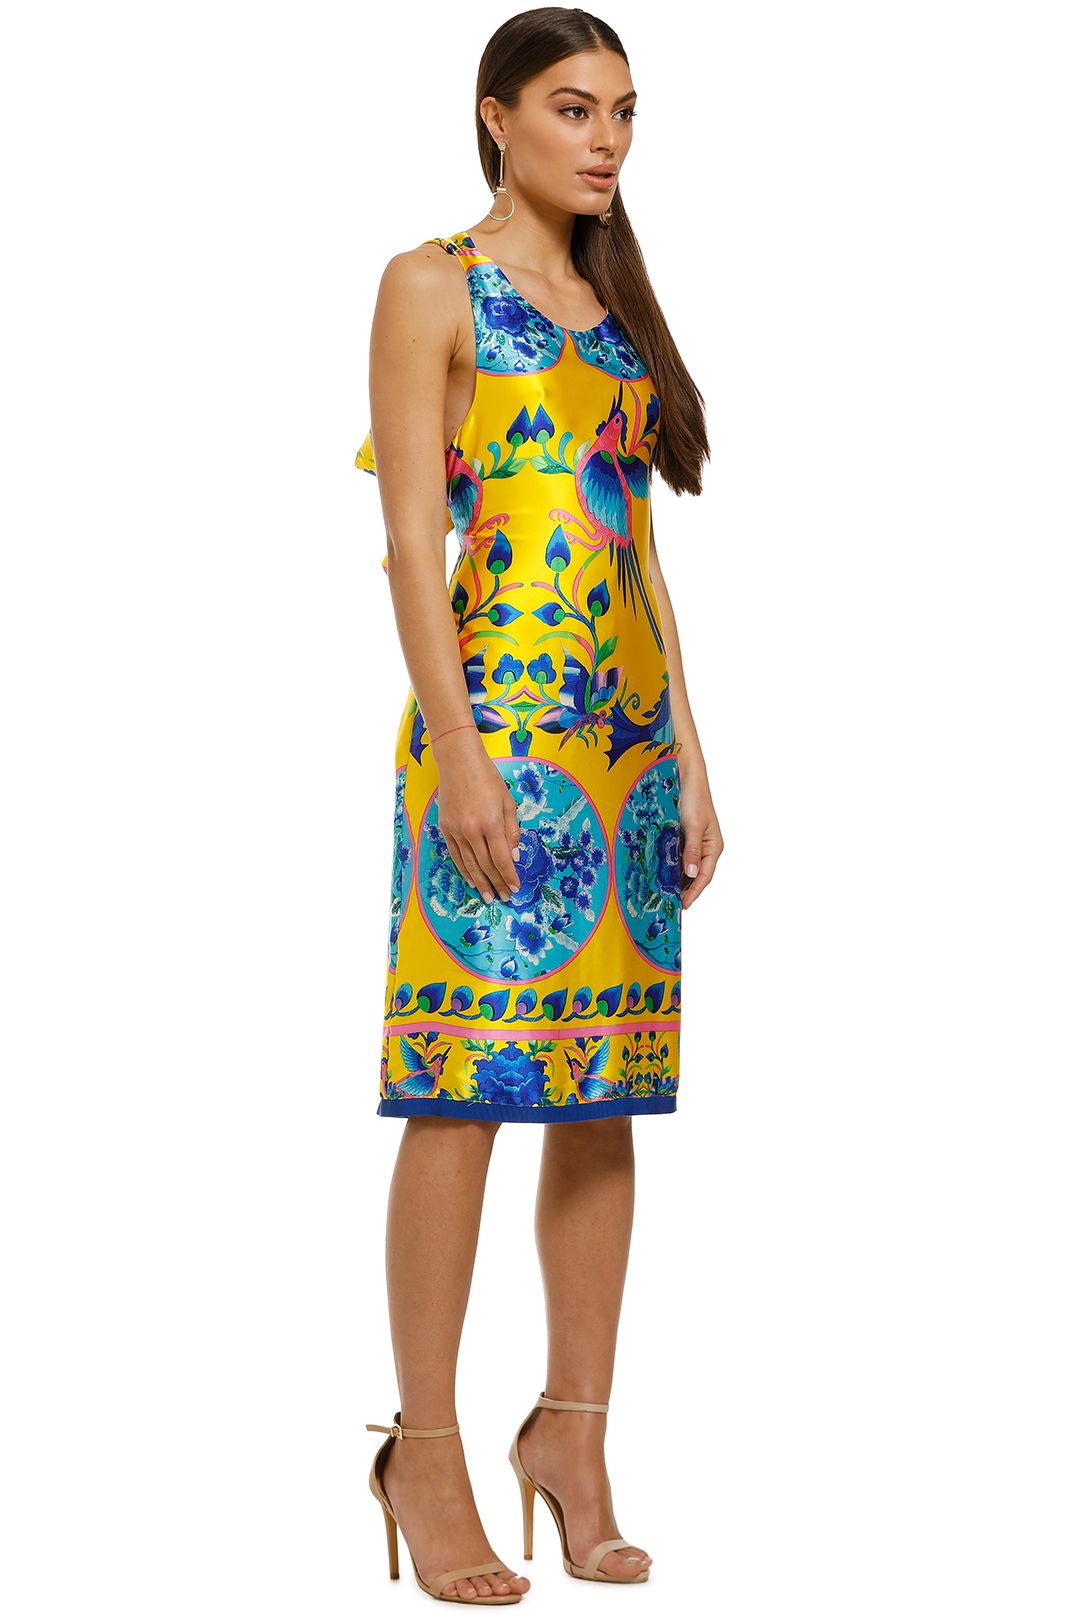 Cooper-by-Trelise-Cooper-Burning-Bright-Dress-Yellow-Print-Side